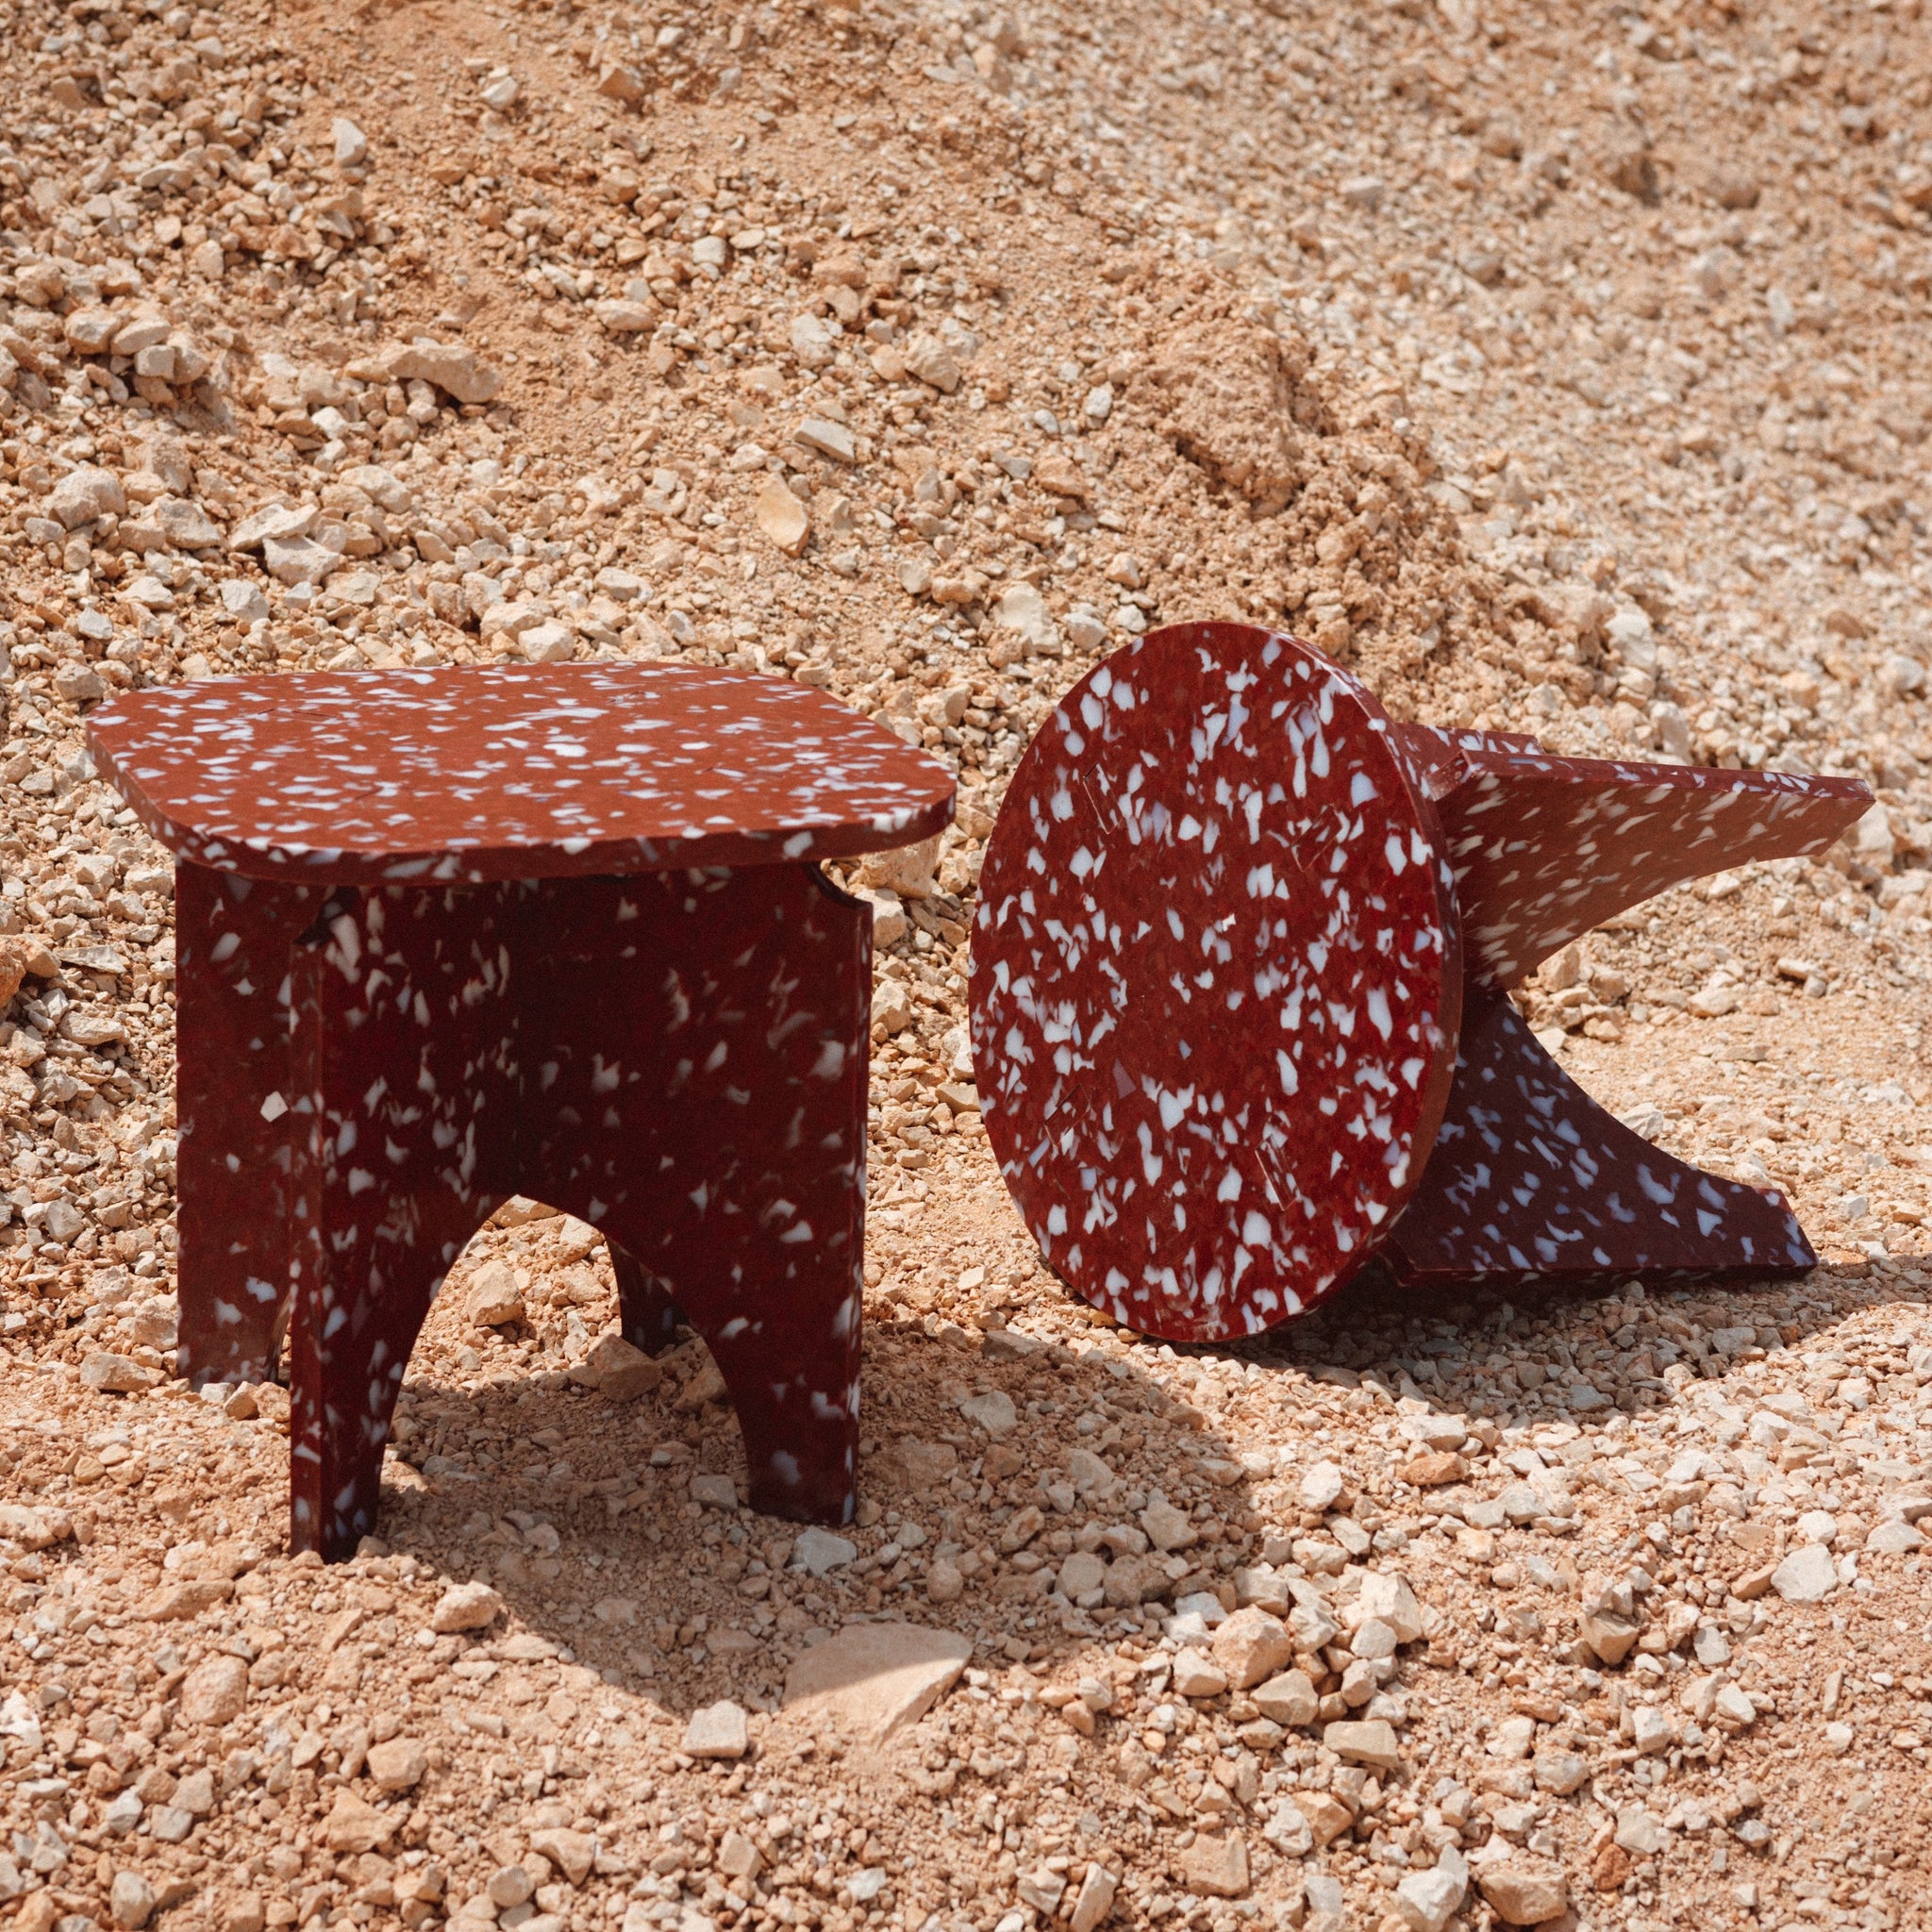 TWO RED STOOLS BY THE MINIMONO PROJECT - BRAND FOR ECO FRIENDLY - PLAYFUL - MULTI FUNCTIONAL - SUSTAINABLE - HIGH QUALITY - DESIGN FURNITURE FROM RECYCLED PLASTIC FOR BOTH ADULT AND CHILDREN MADE IN BERLIN GERMANY